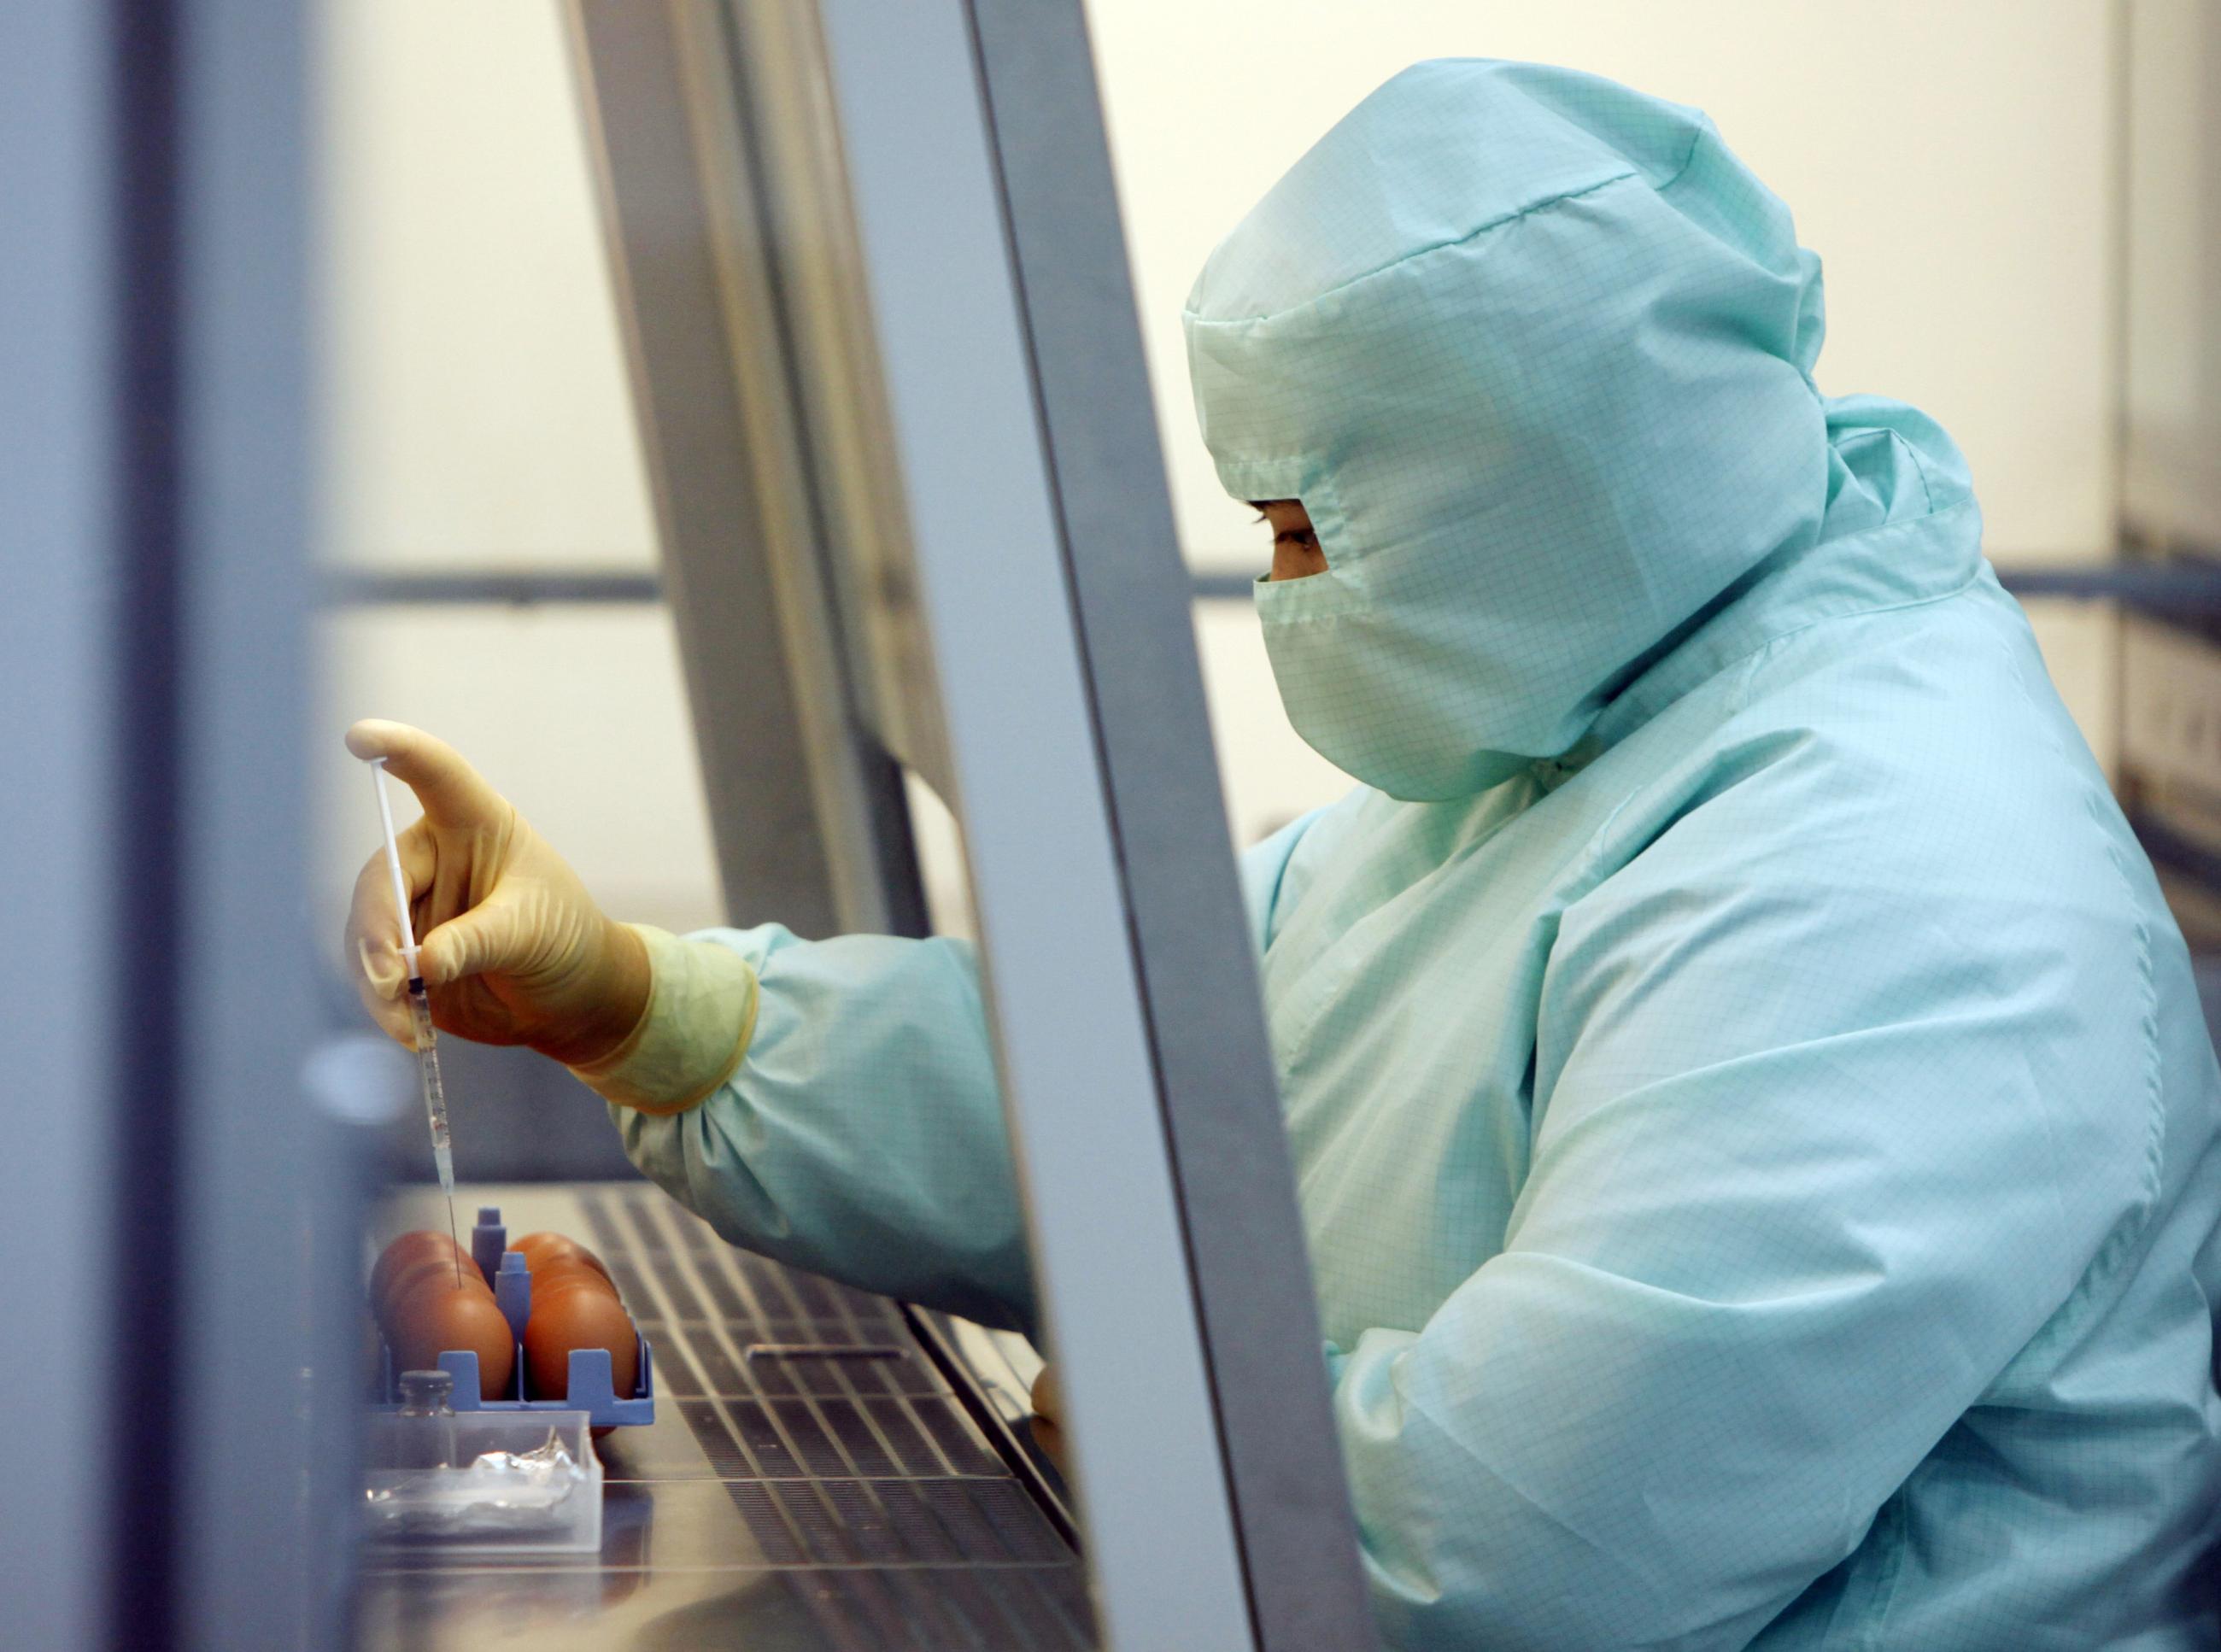 A scientist works on developing the H1N1 (Influenza A) vaccine inside a biosafety level 3 (BSL-3) lab.